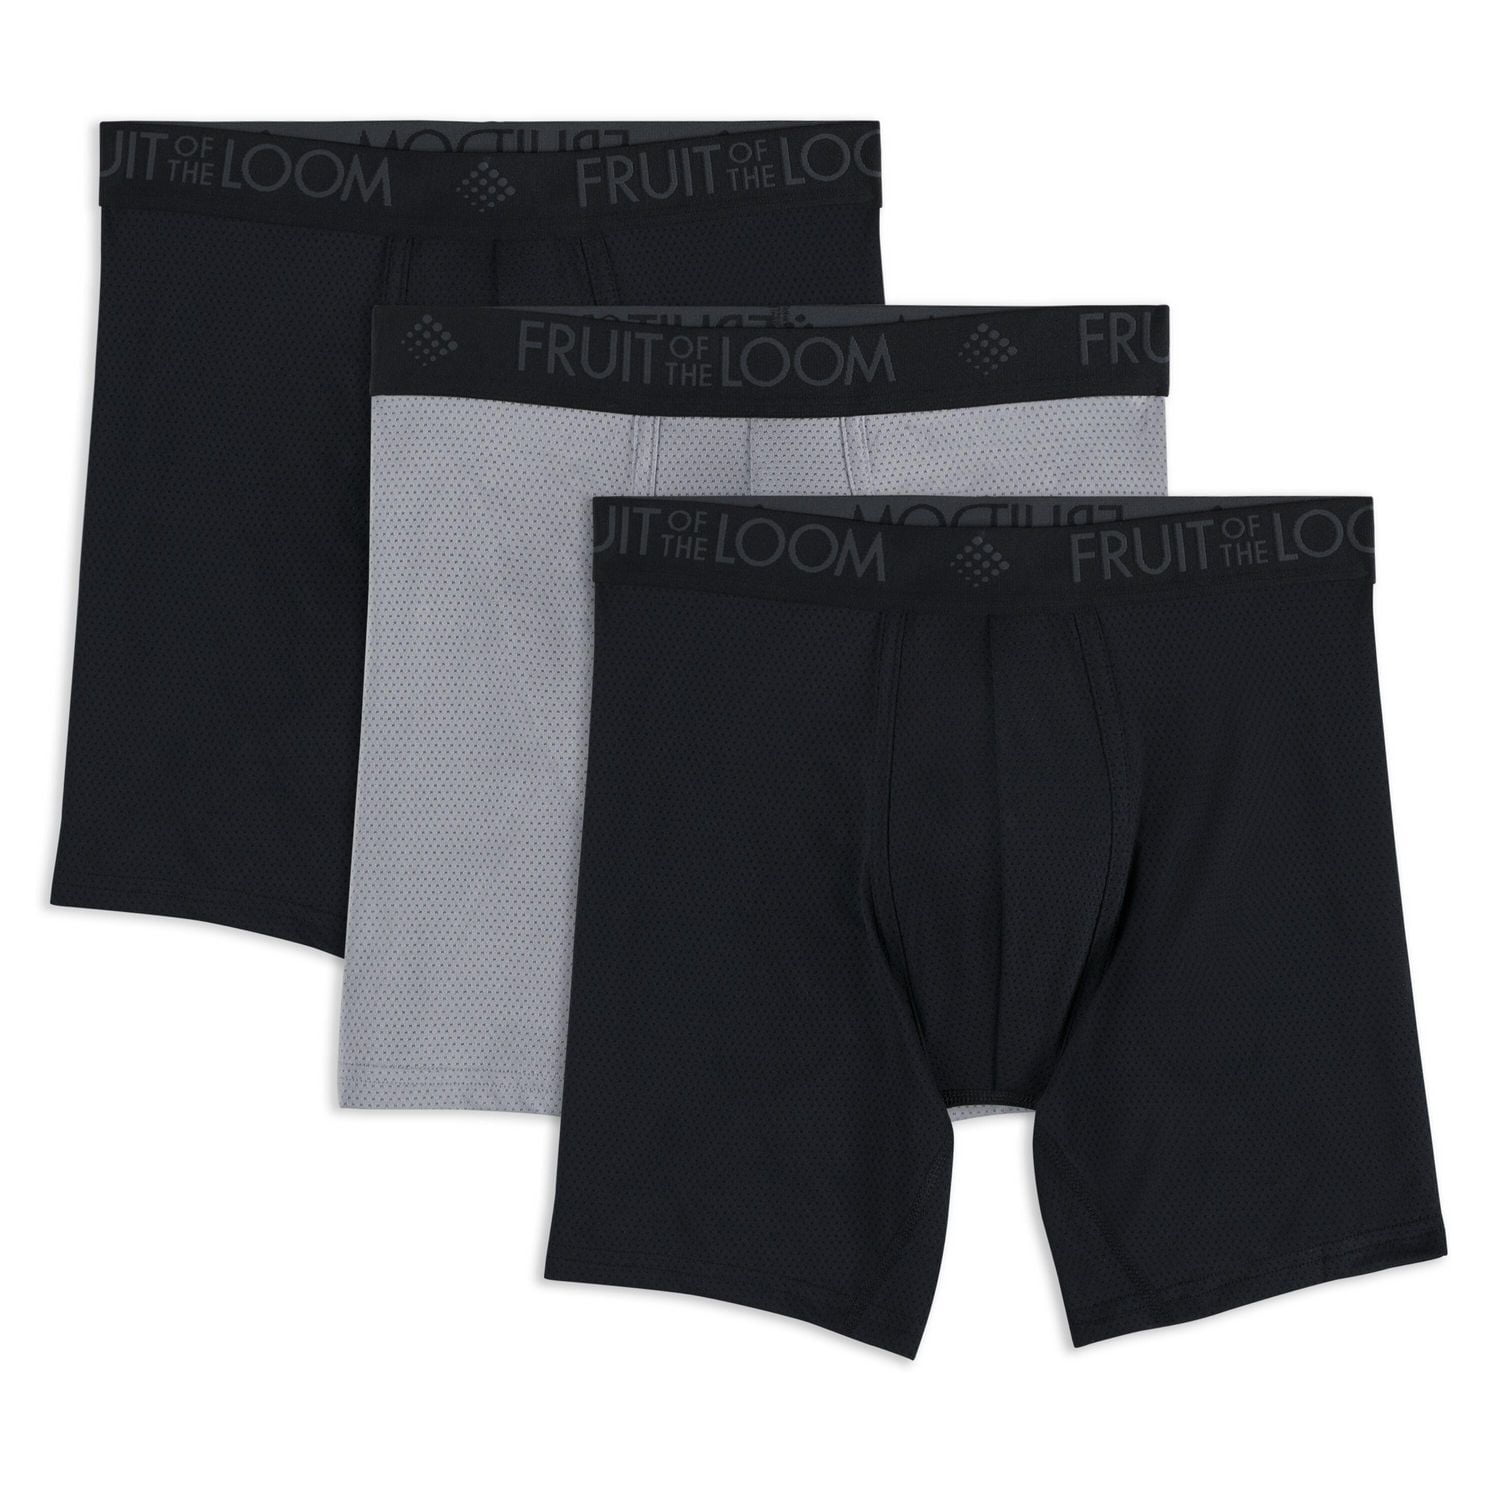 Fruit of the Loom Men's 360 Stretch Boxer Briefs (Quick Dry